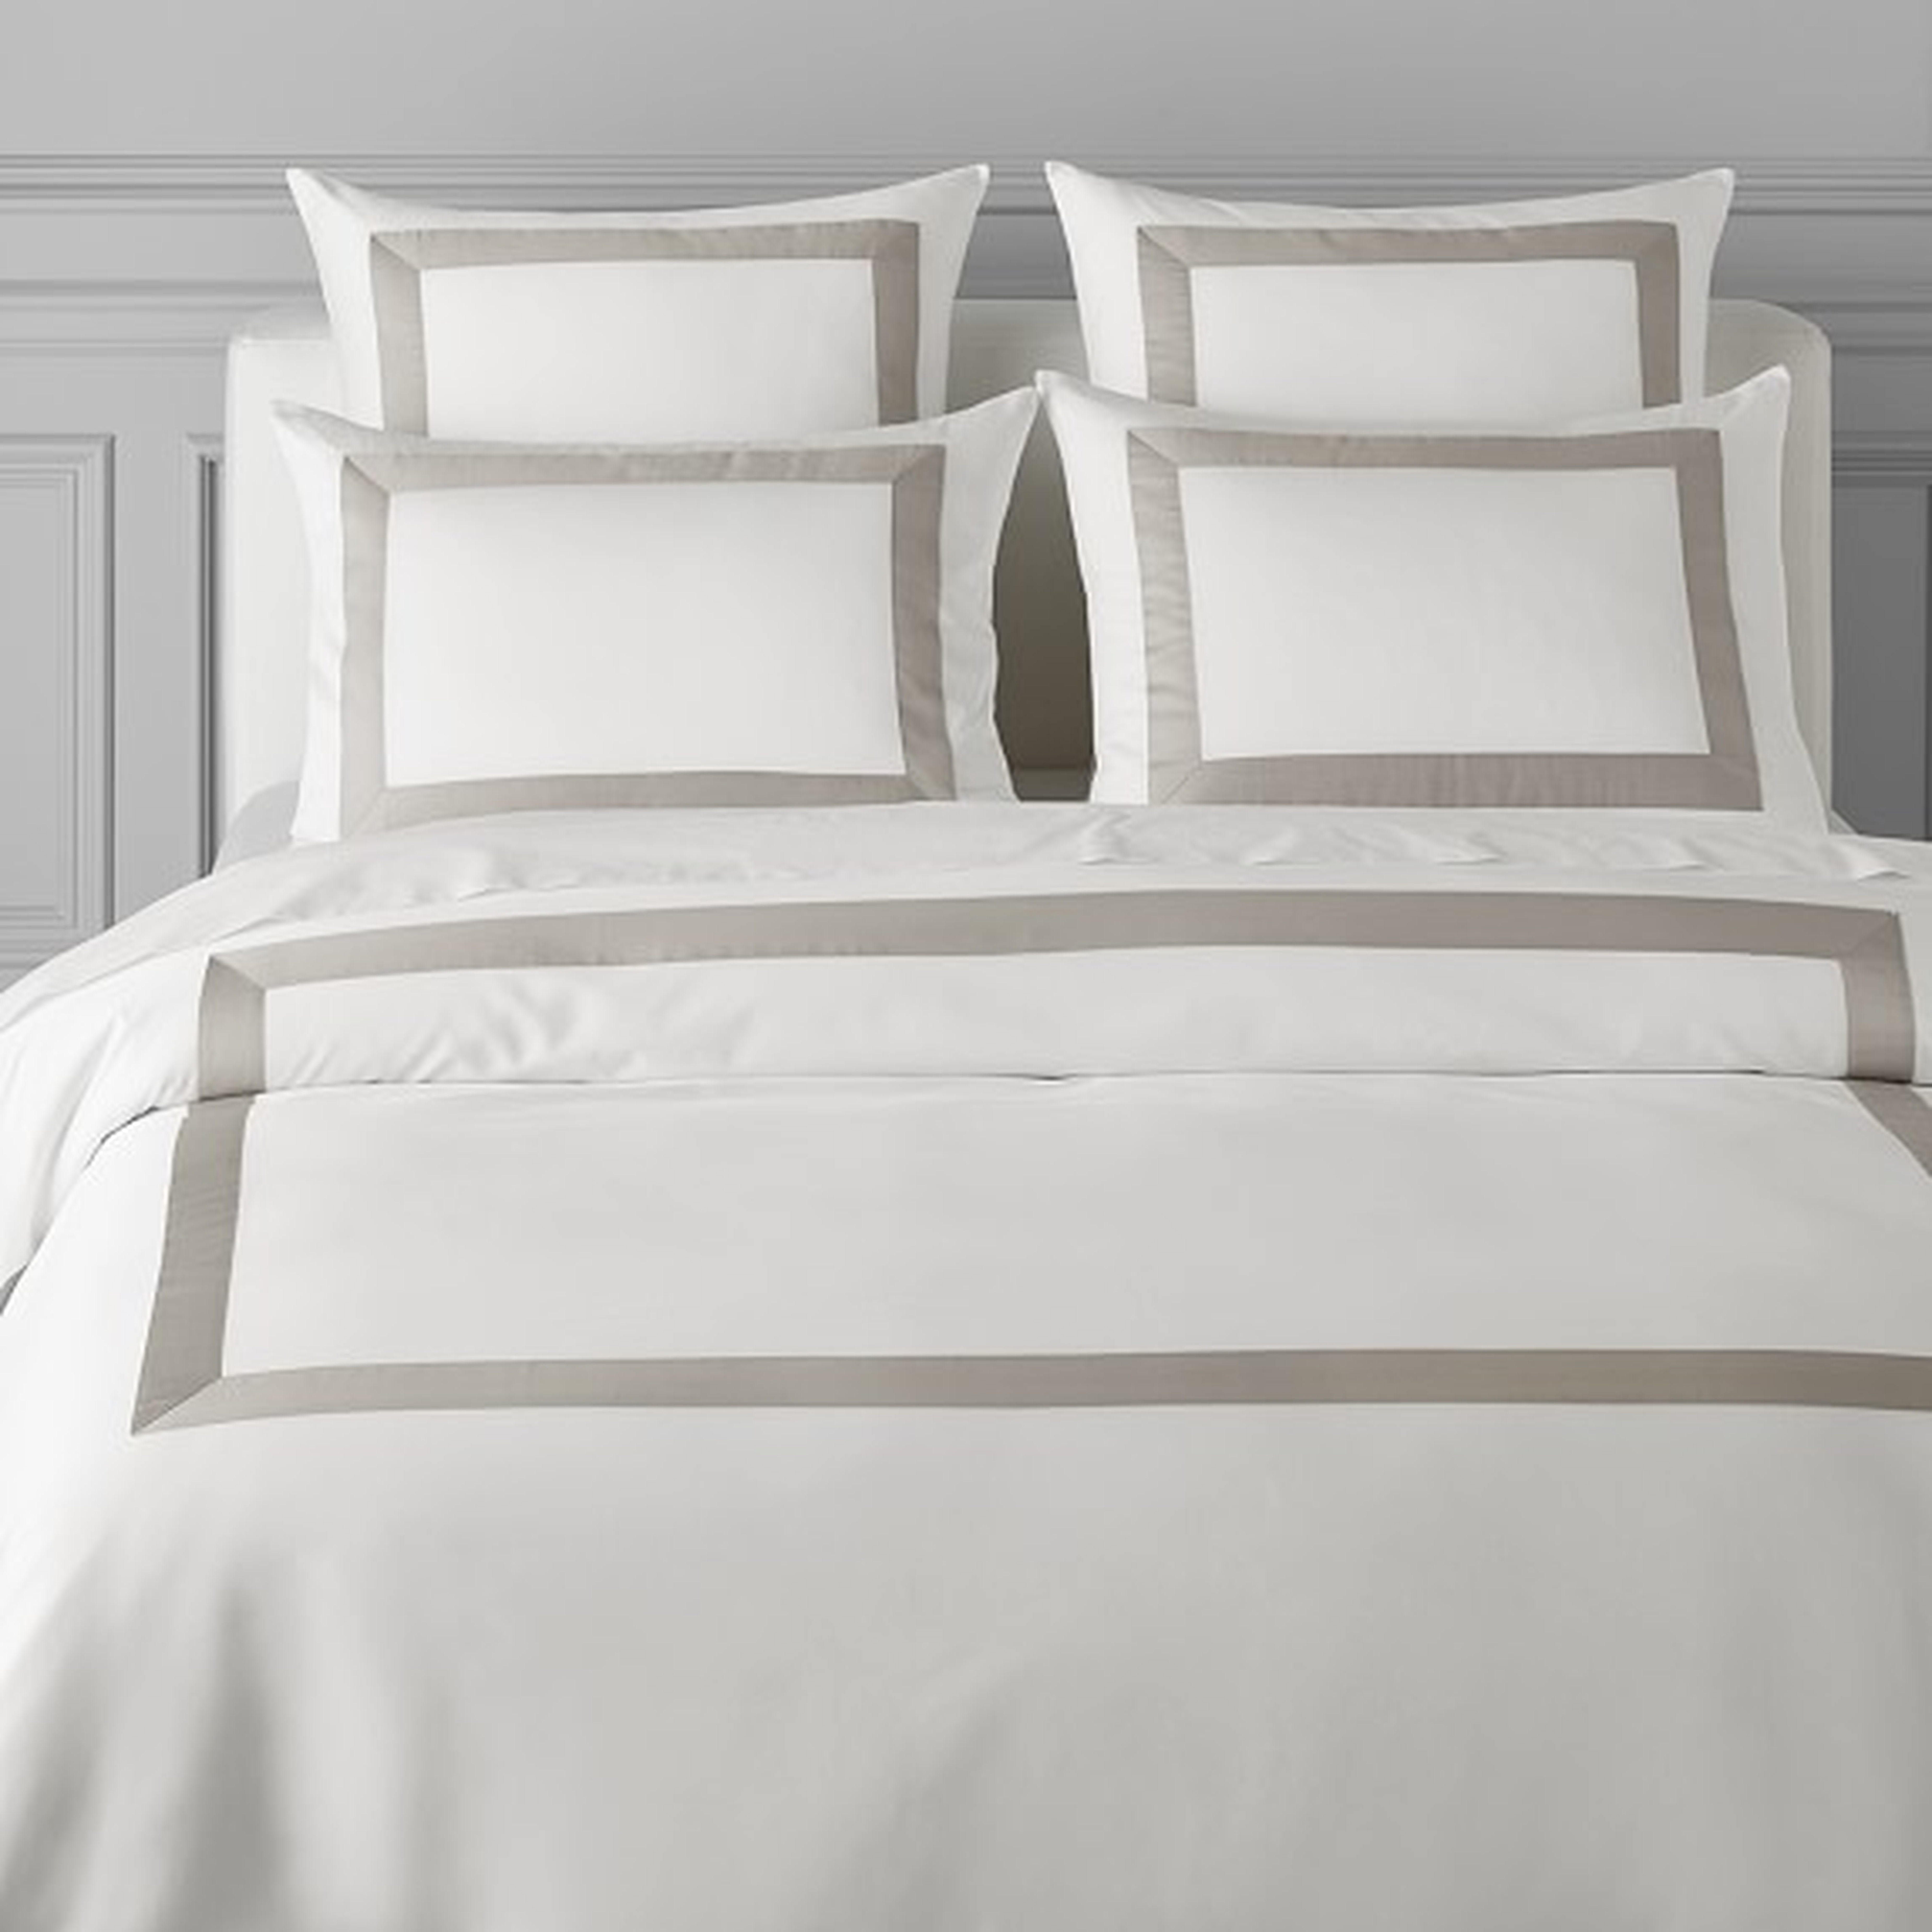 Chambers® Monte Carlo 300 Thread Count Italian, Duvet Cover, King/Cal King, Grey - Williams Sonoma